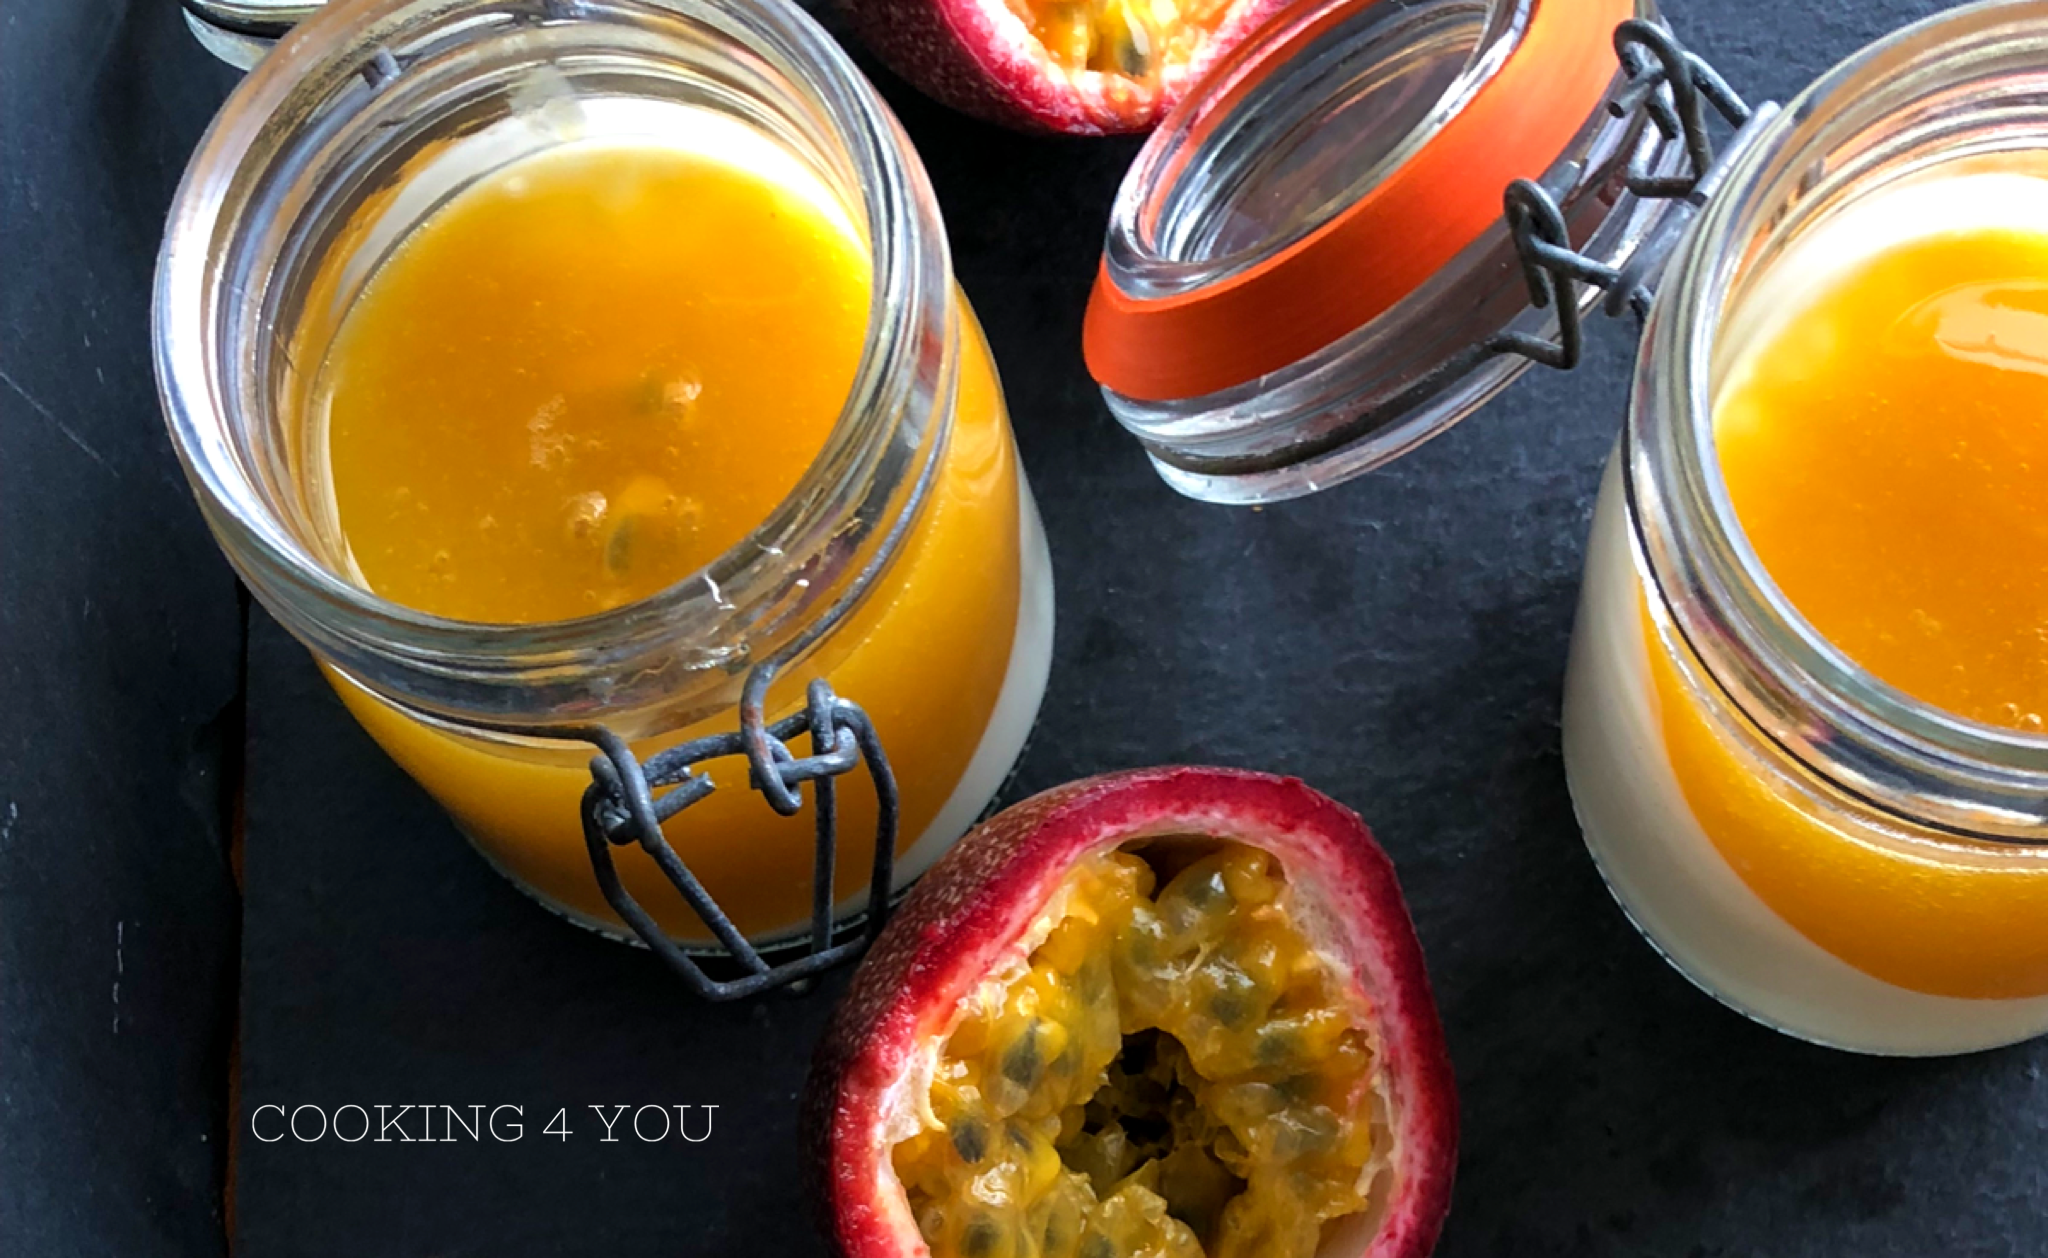 Panna cotta vanille, coulis mangue passion - Cooking 4 You